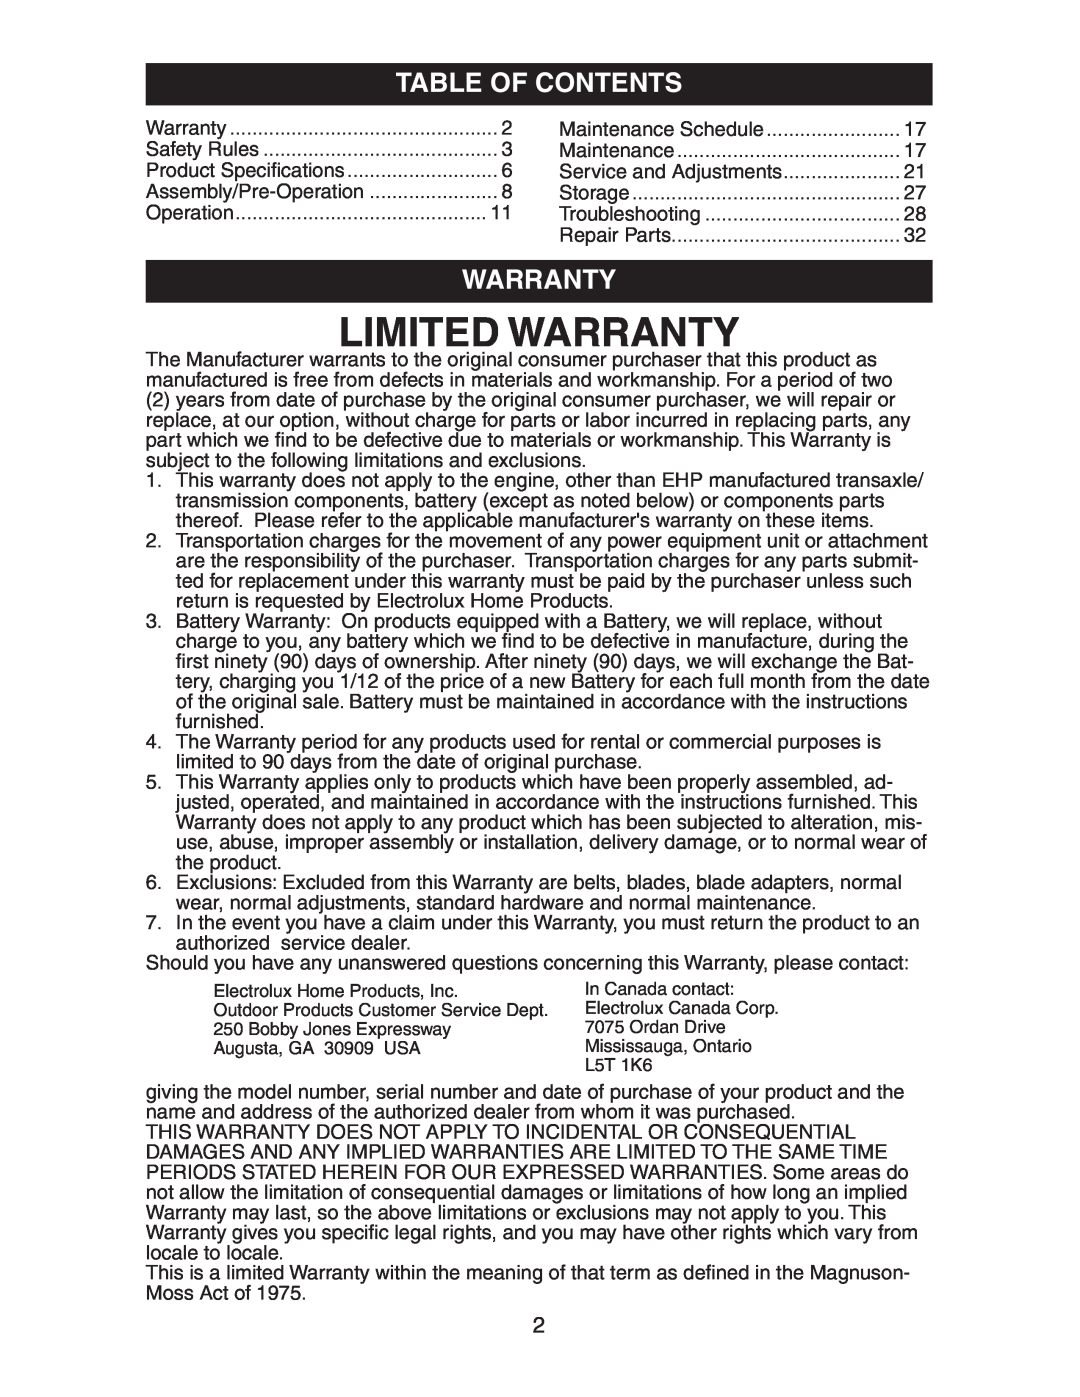 Electrolux AG15538A manual Table Of Contents, Limited Warranty 